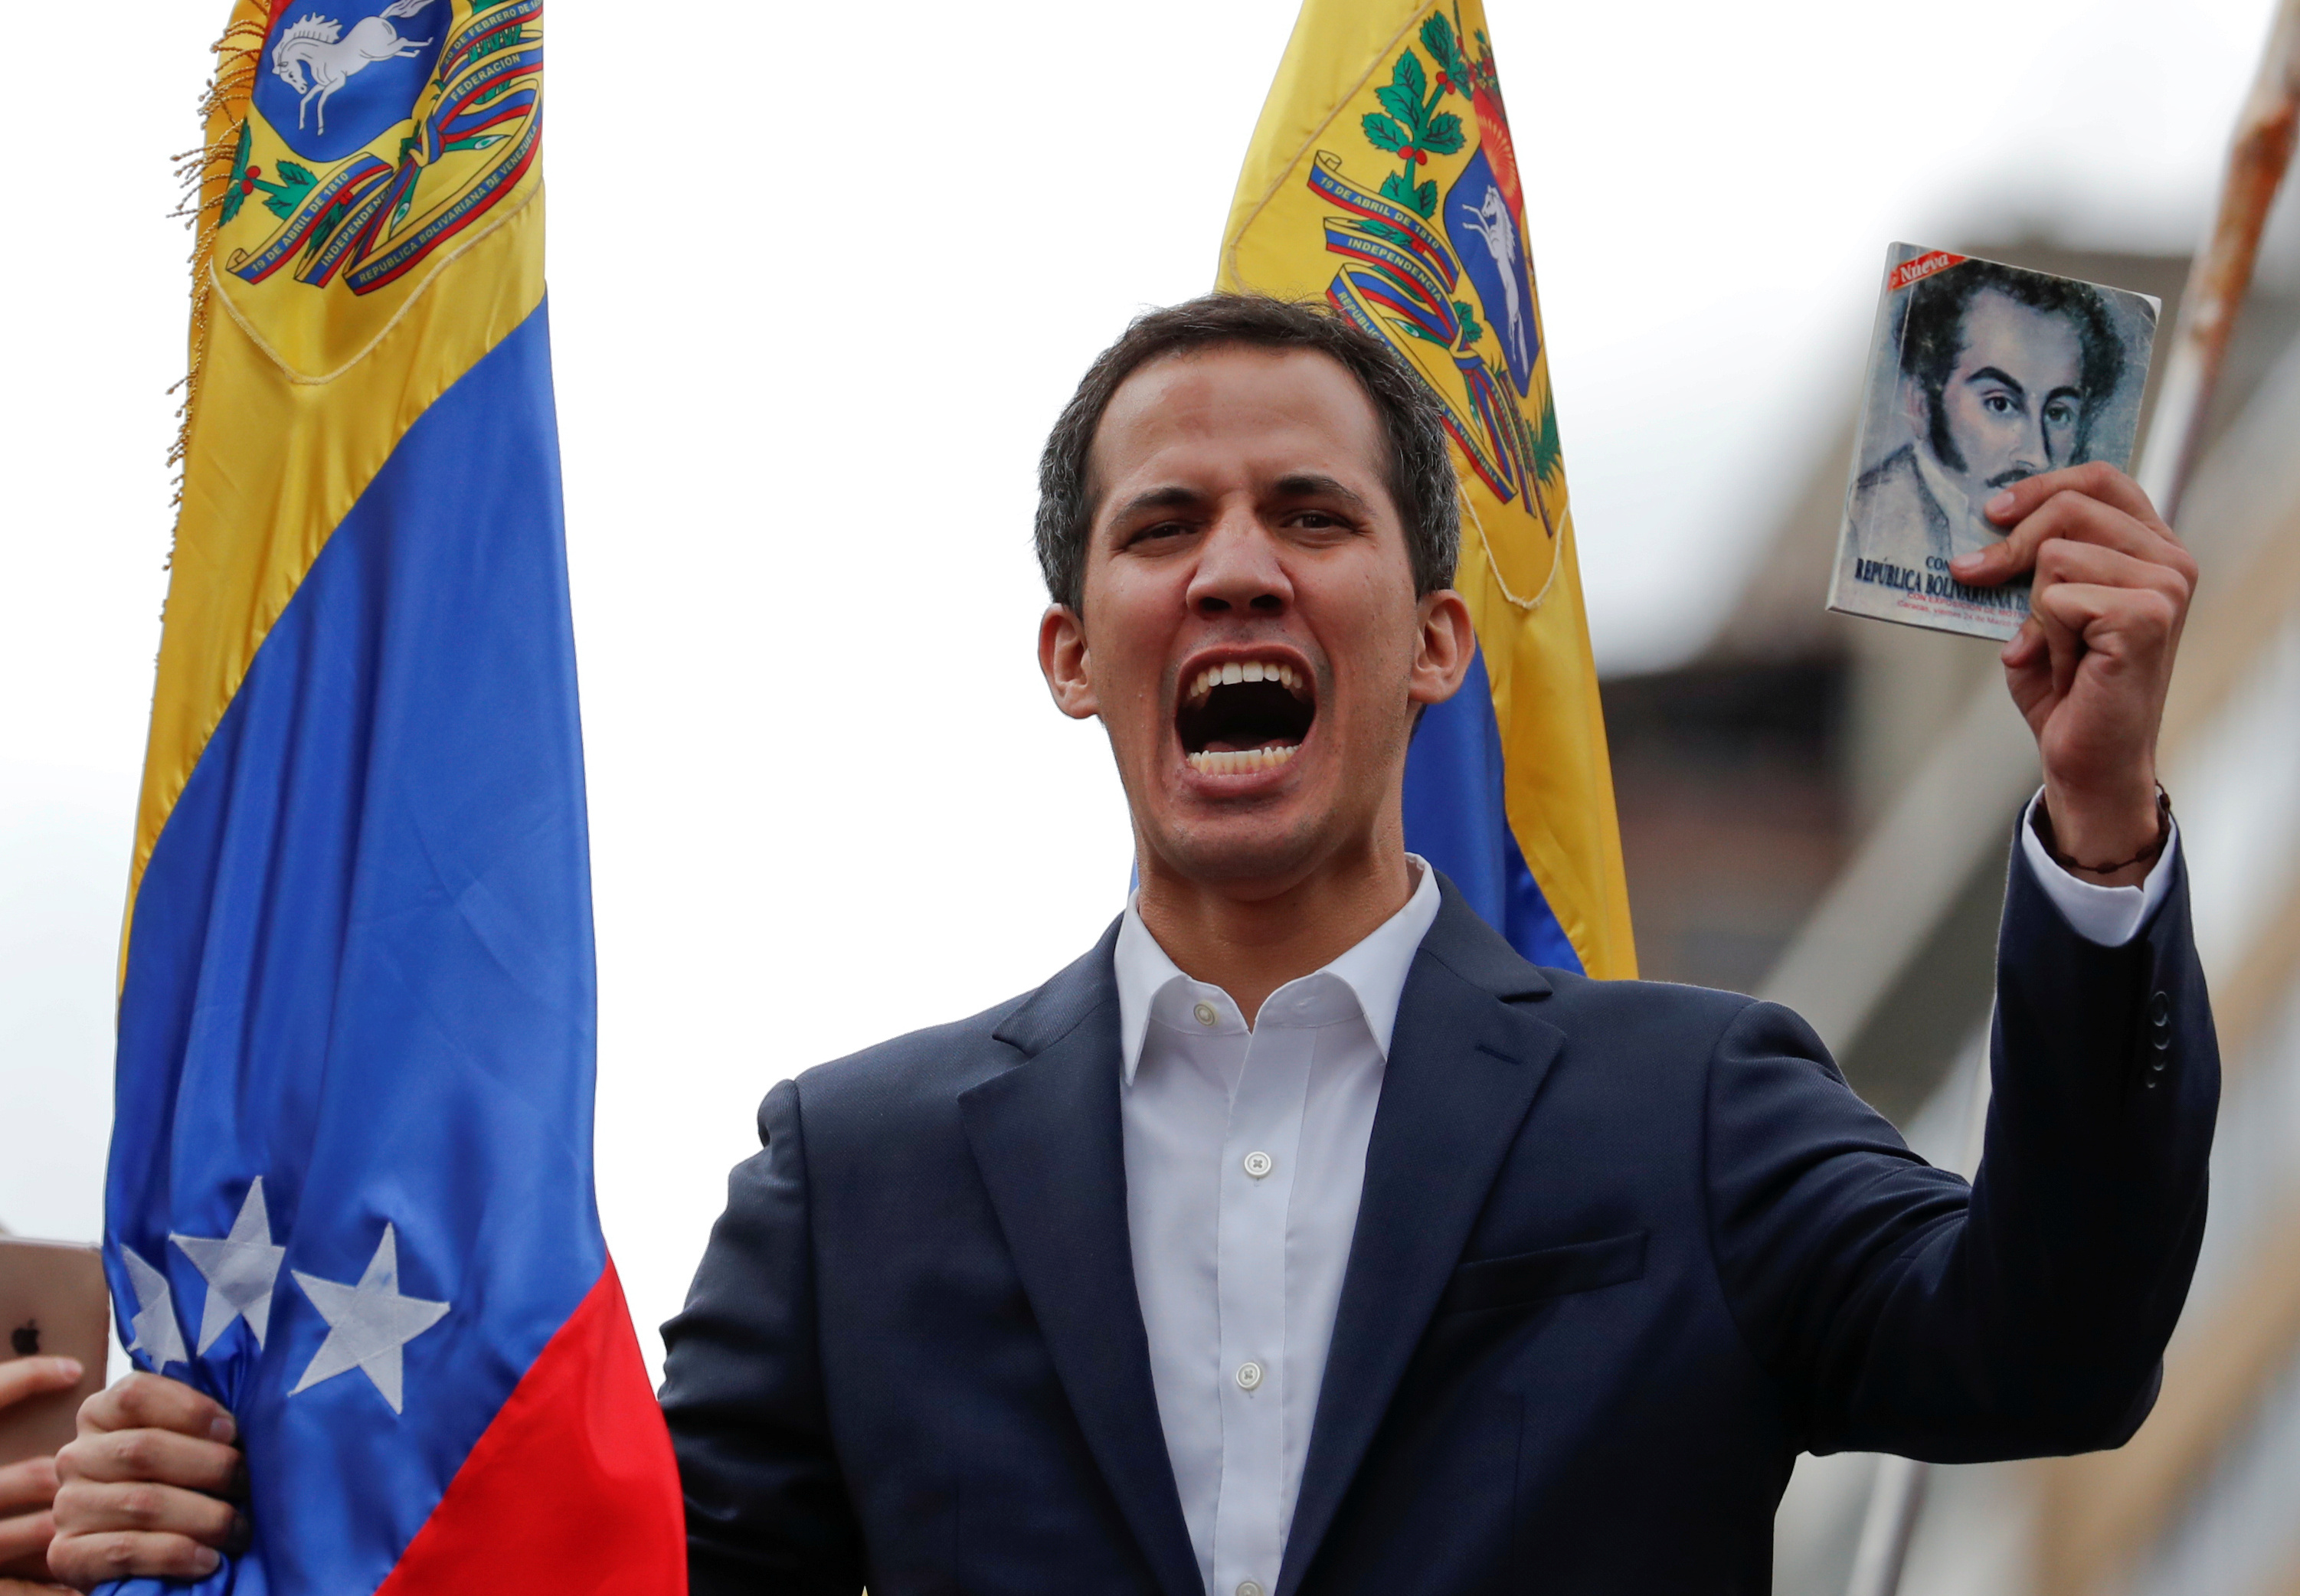 Juan Guaido, President of Venezuela's National Assembly, holds a copy of Venezuelan constitution during a rally against Venezuelan President Nicolas Maduro's government and to commemorate the 61st anniversary of the end of the dictatorship of Marcos Perez Jimenez in Caracas, Venezuela January 23, 2019. REUTERS/Carlos Garcia Rawlins